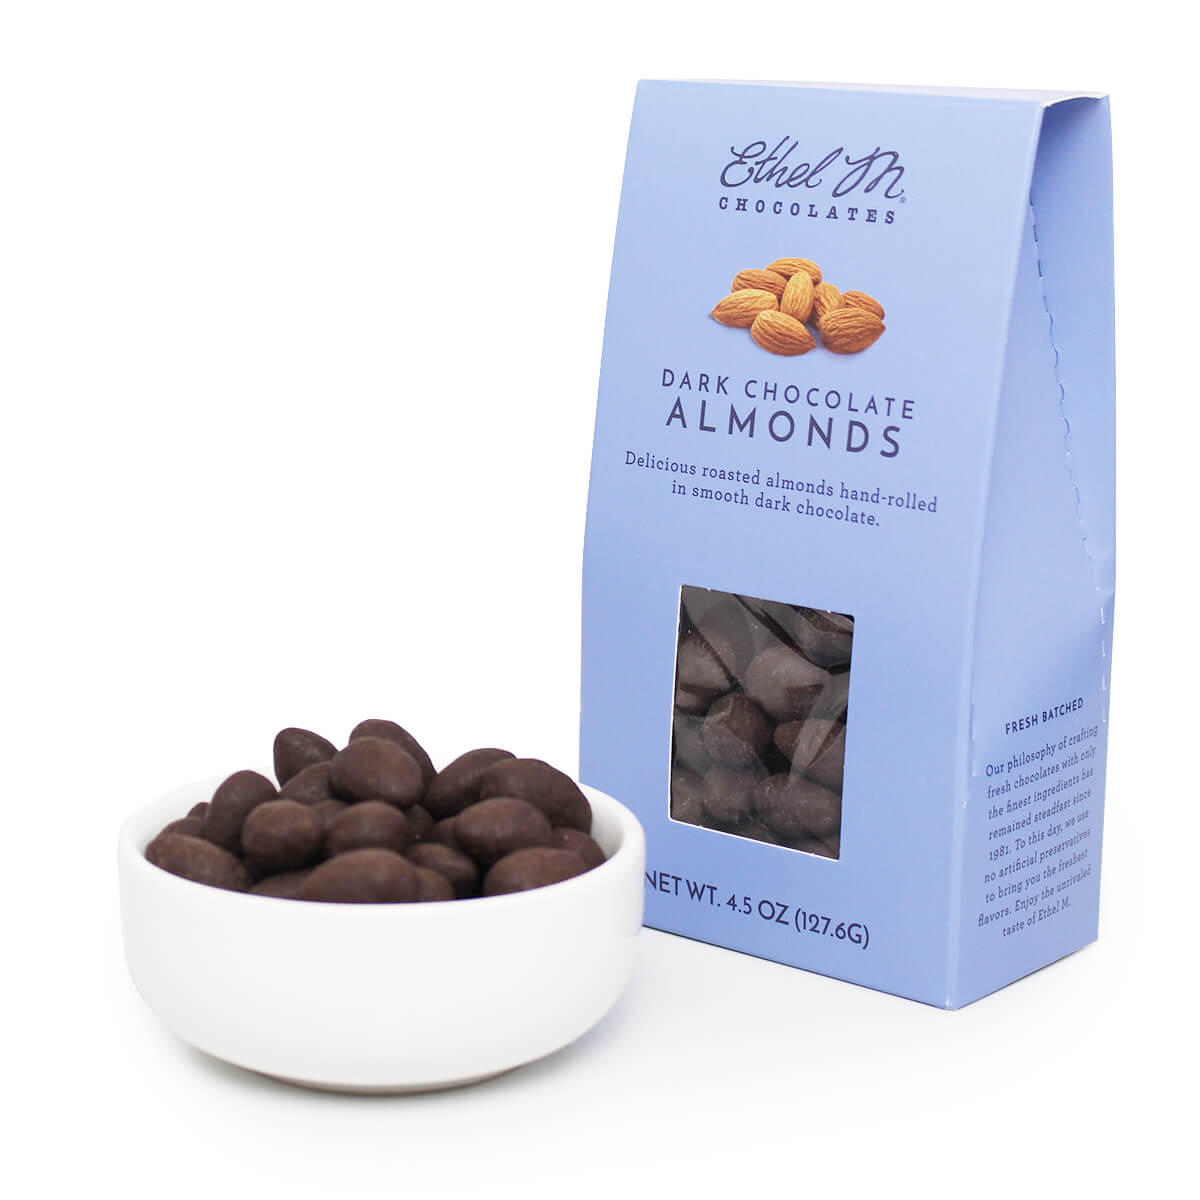 Ethel M Chocolates Dark Chocolate Covered Almonds Lifestyle Image Showing the Chocolate Covered Almonds in a white dish.